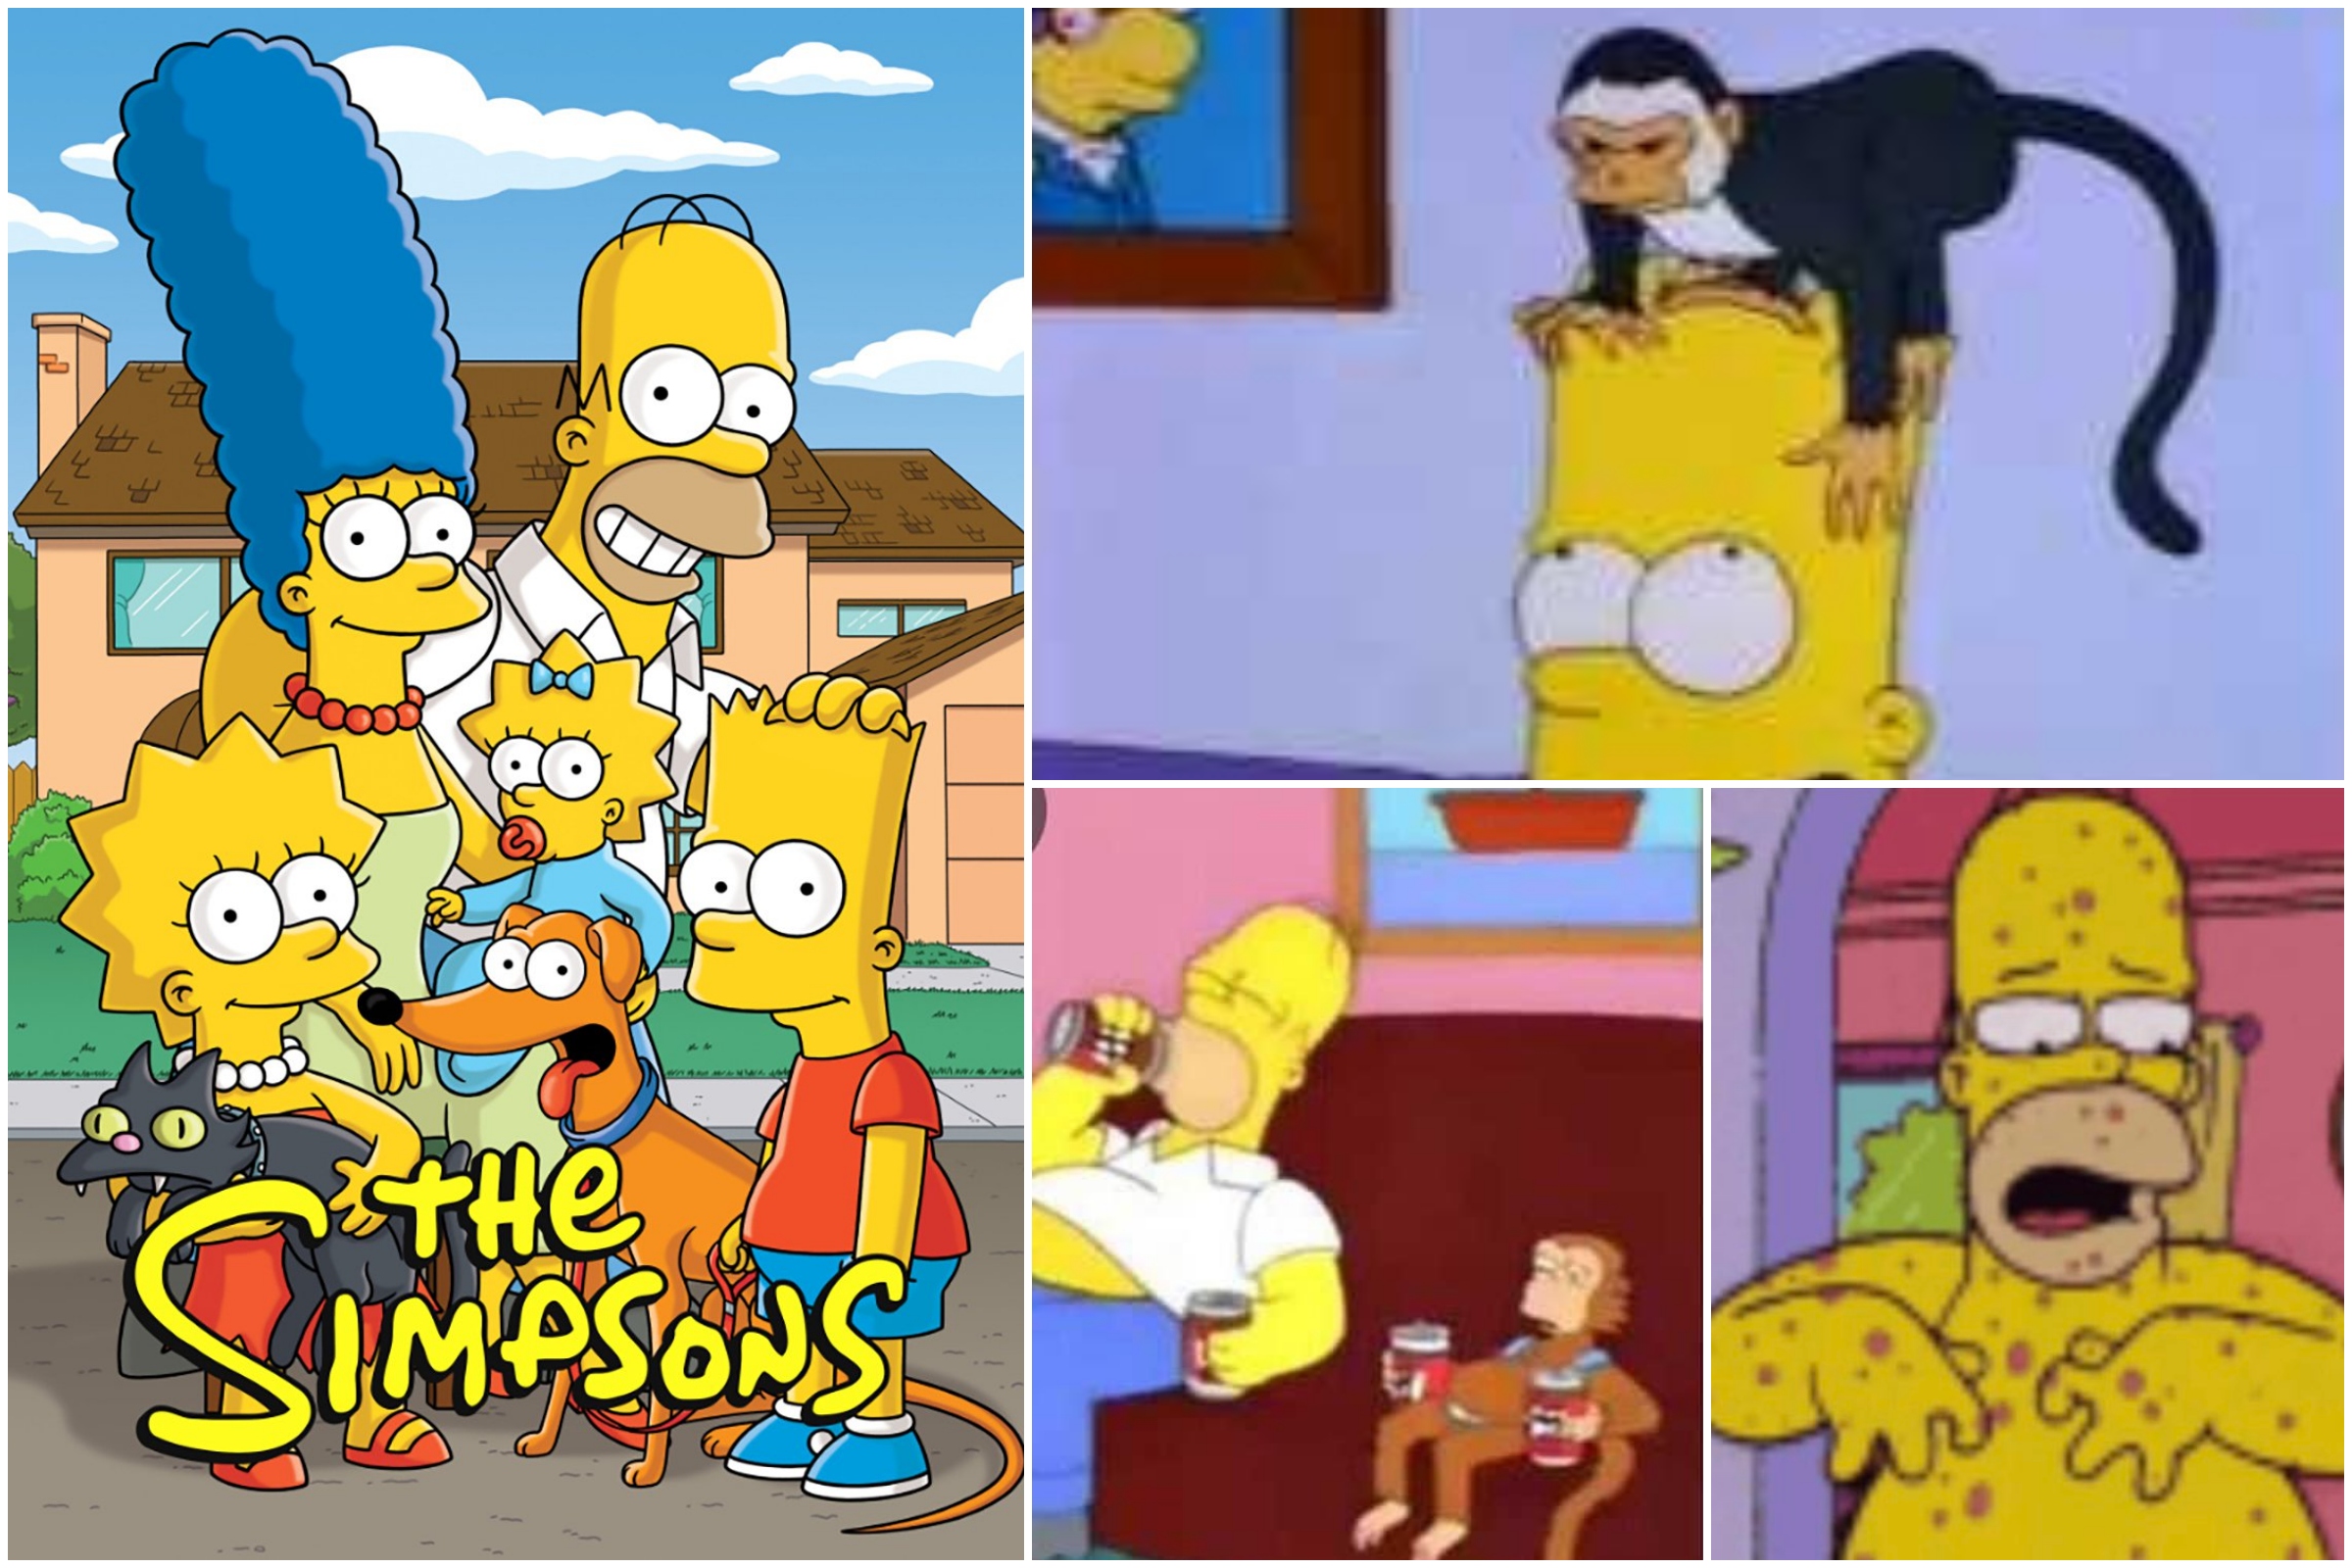 Simpsons only fans